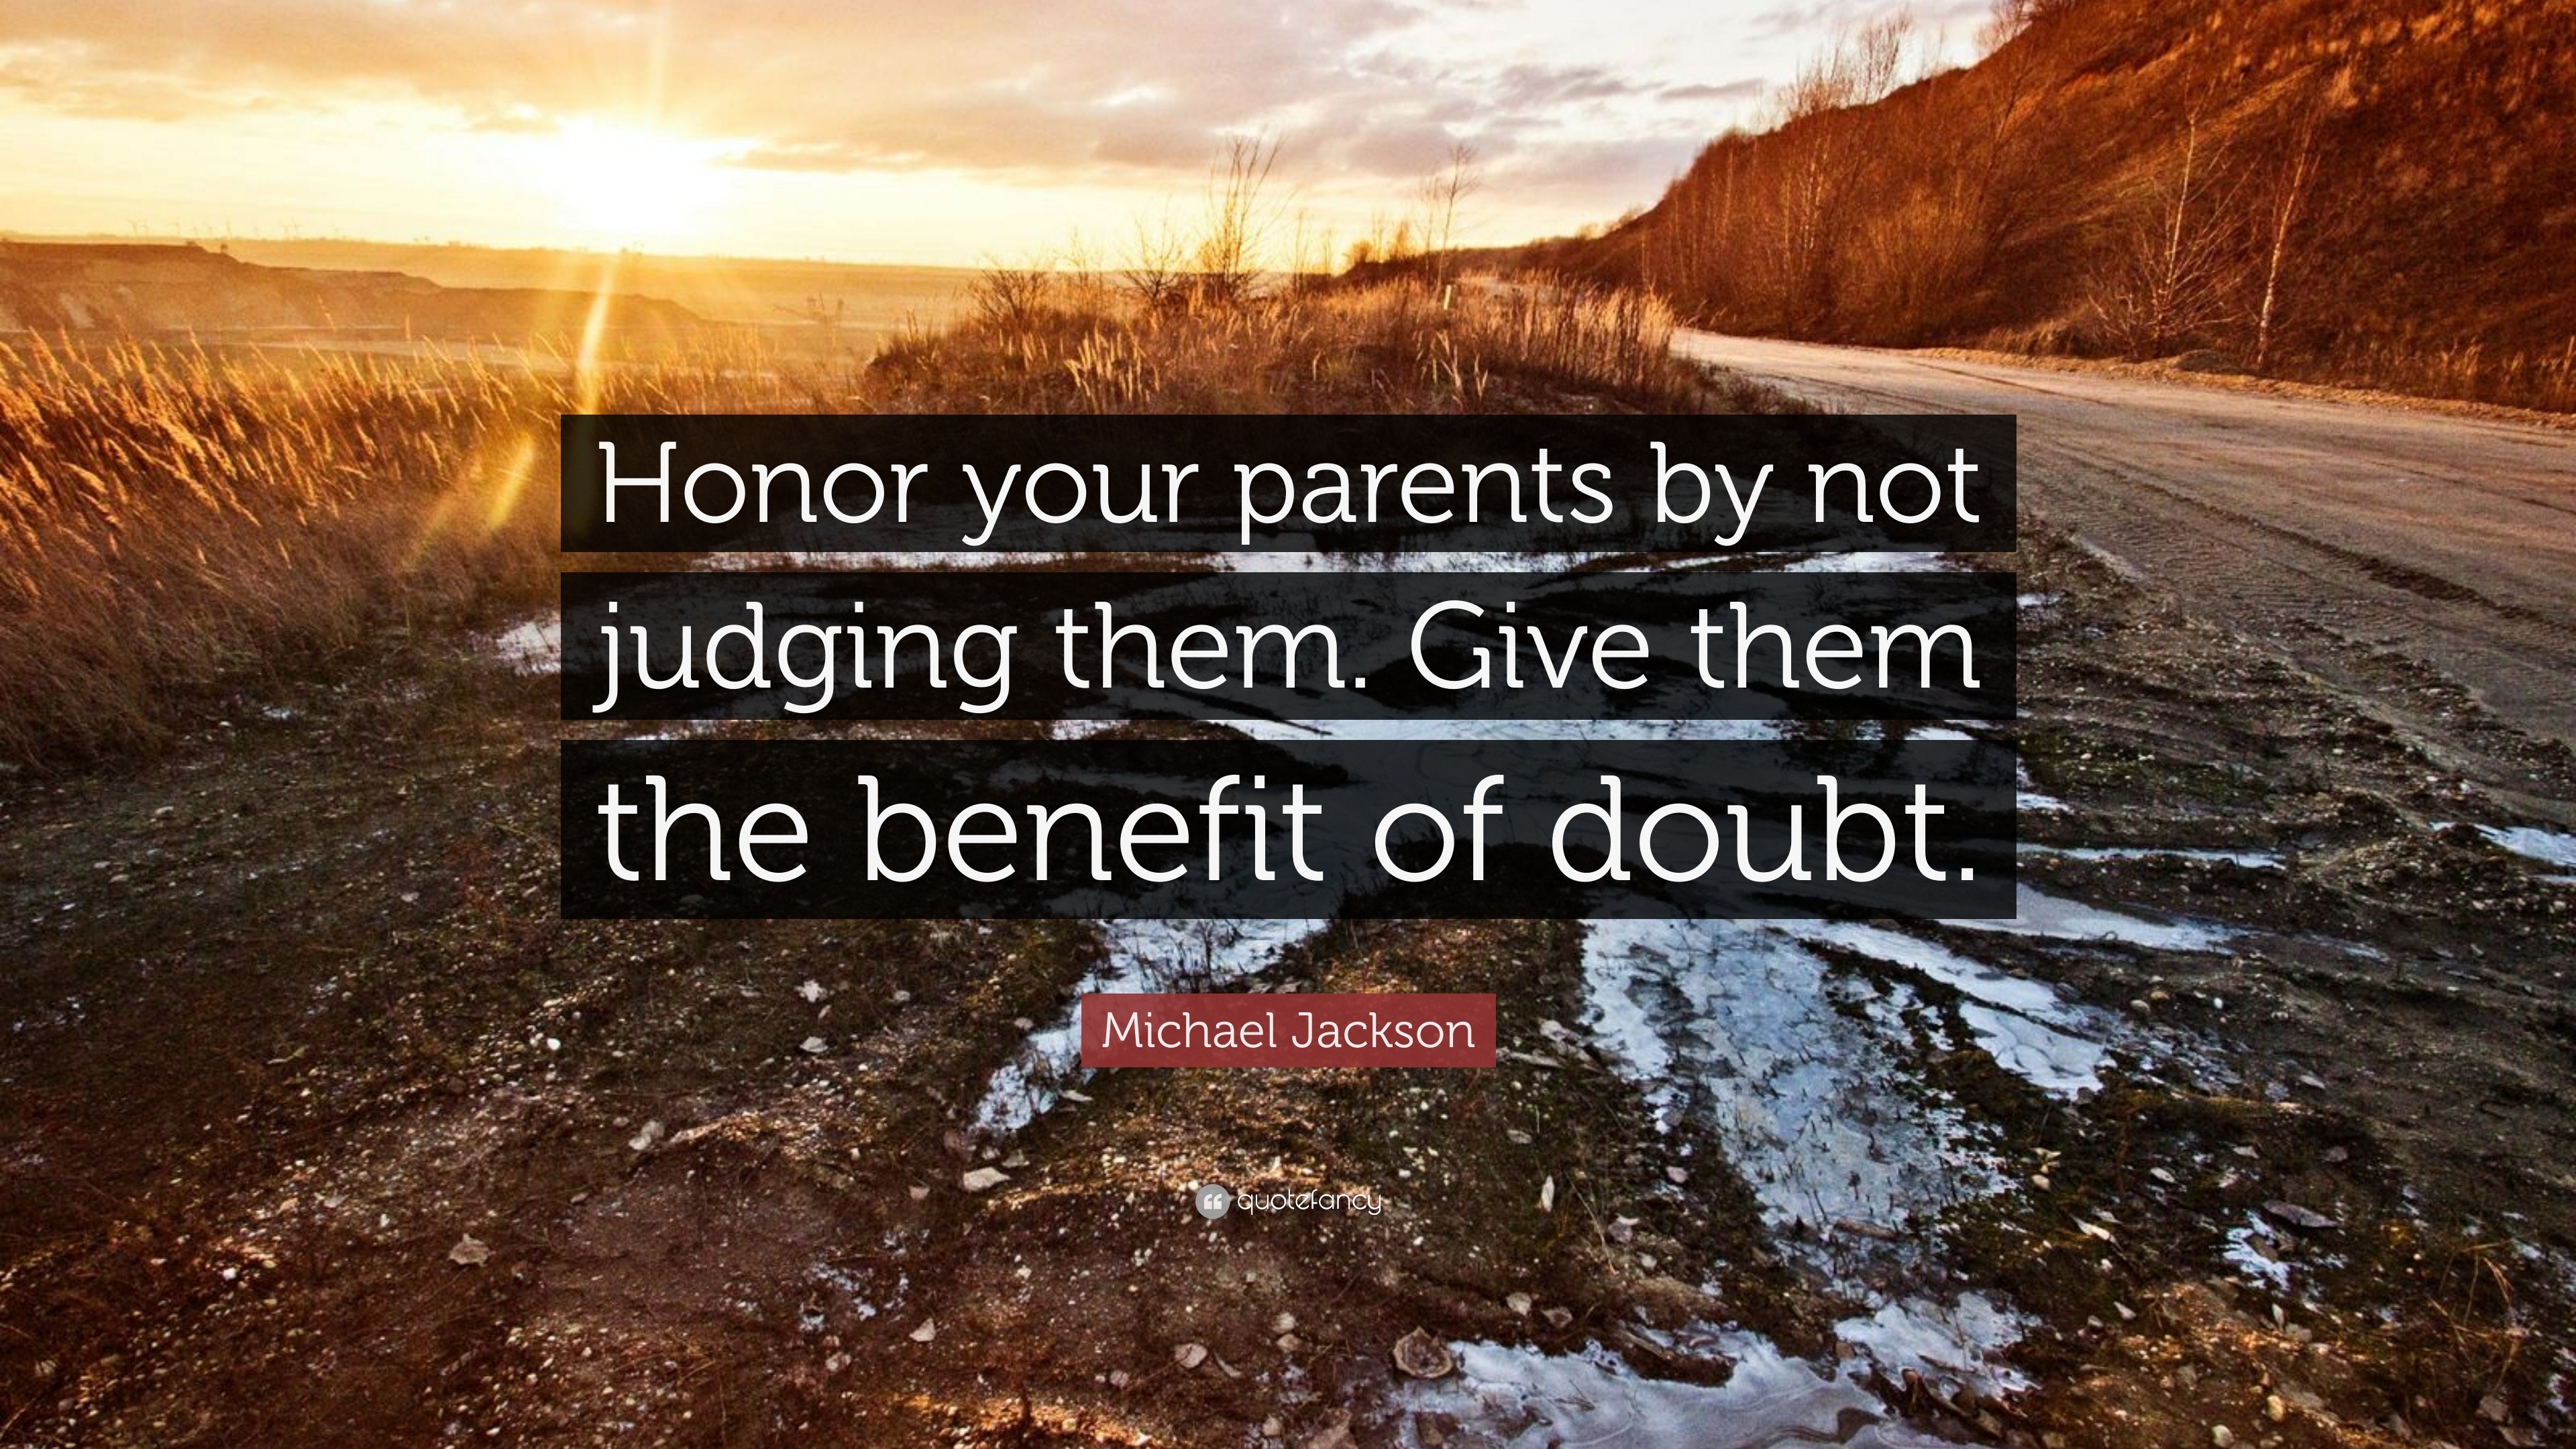 Michael Jackson Quote “Honor your parents by not judging